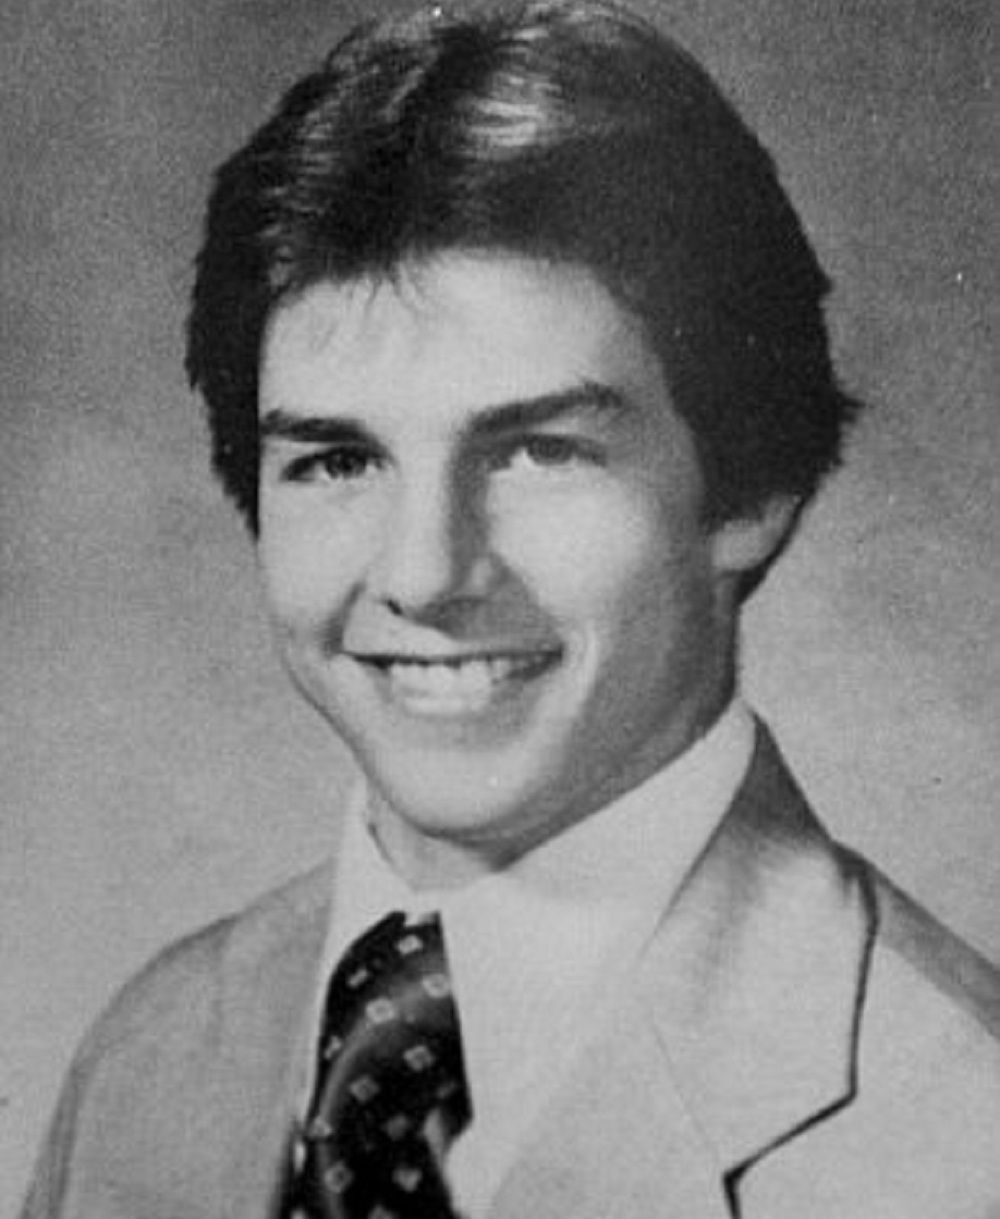 Tom Cruise as a teenager in 1980